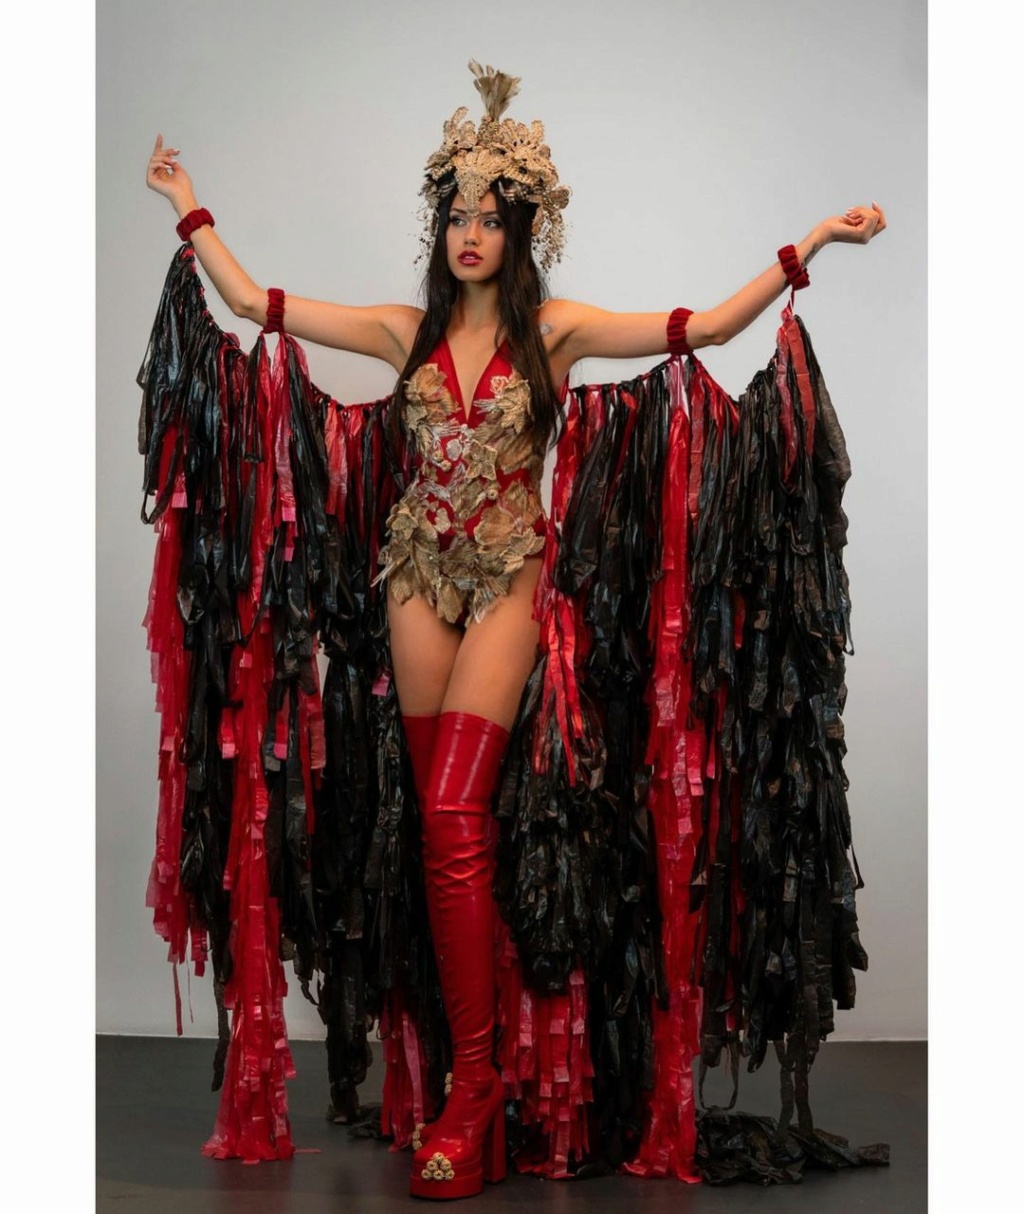  ♔ MISS UNIVERSE 2022 - NATIONAL COSTUME  ♔ - Page 2 32382910